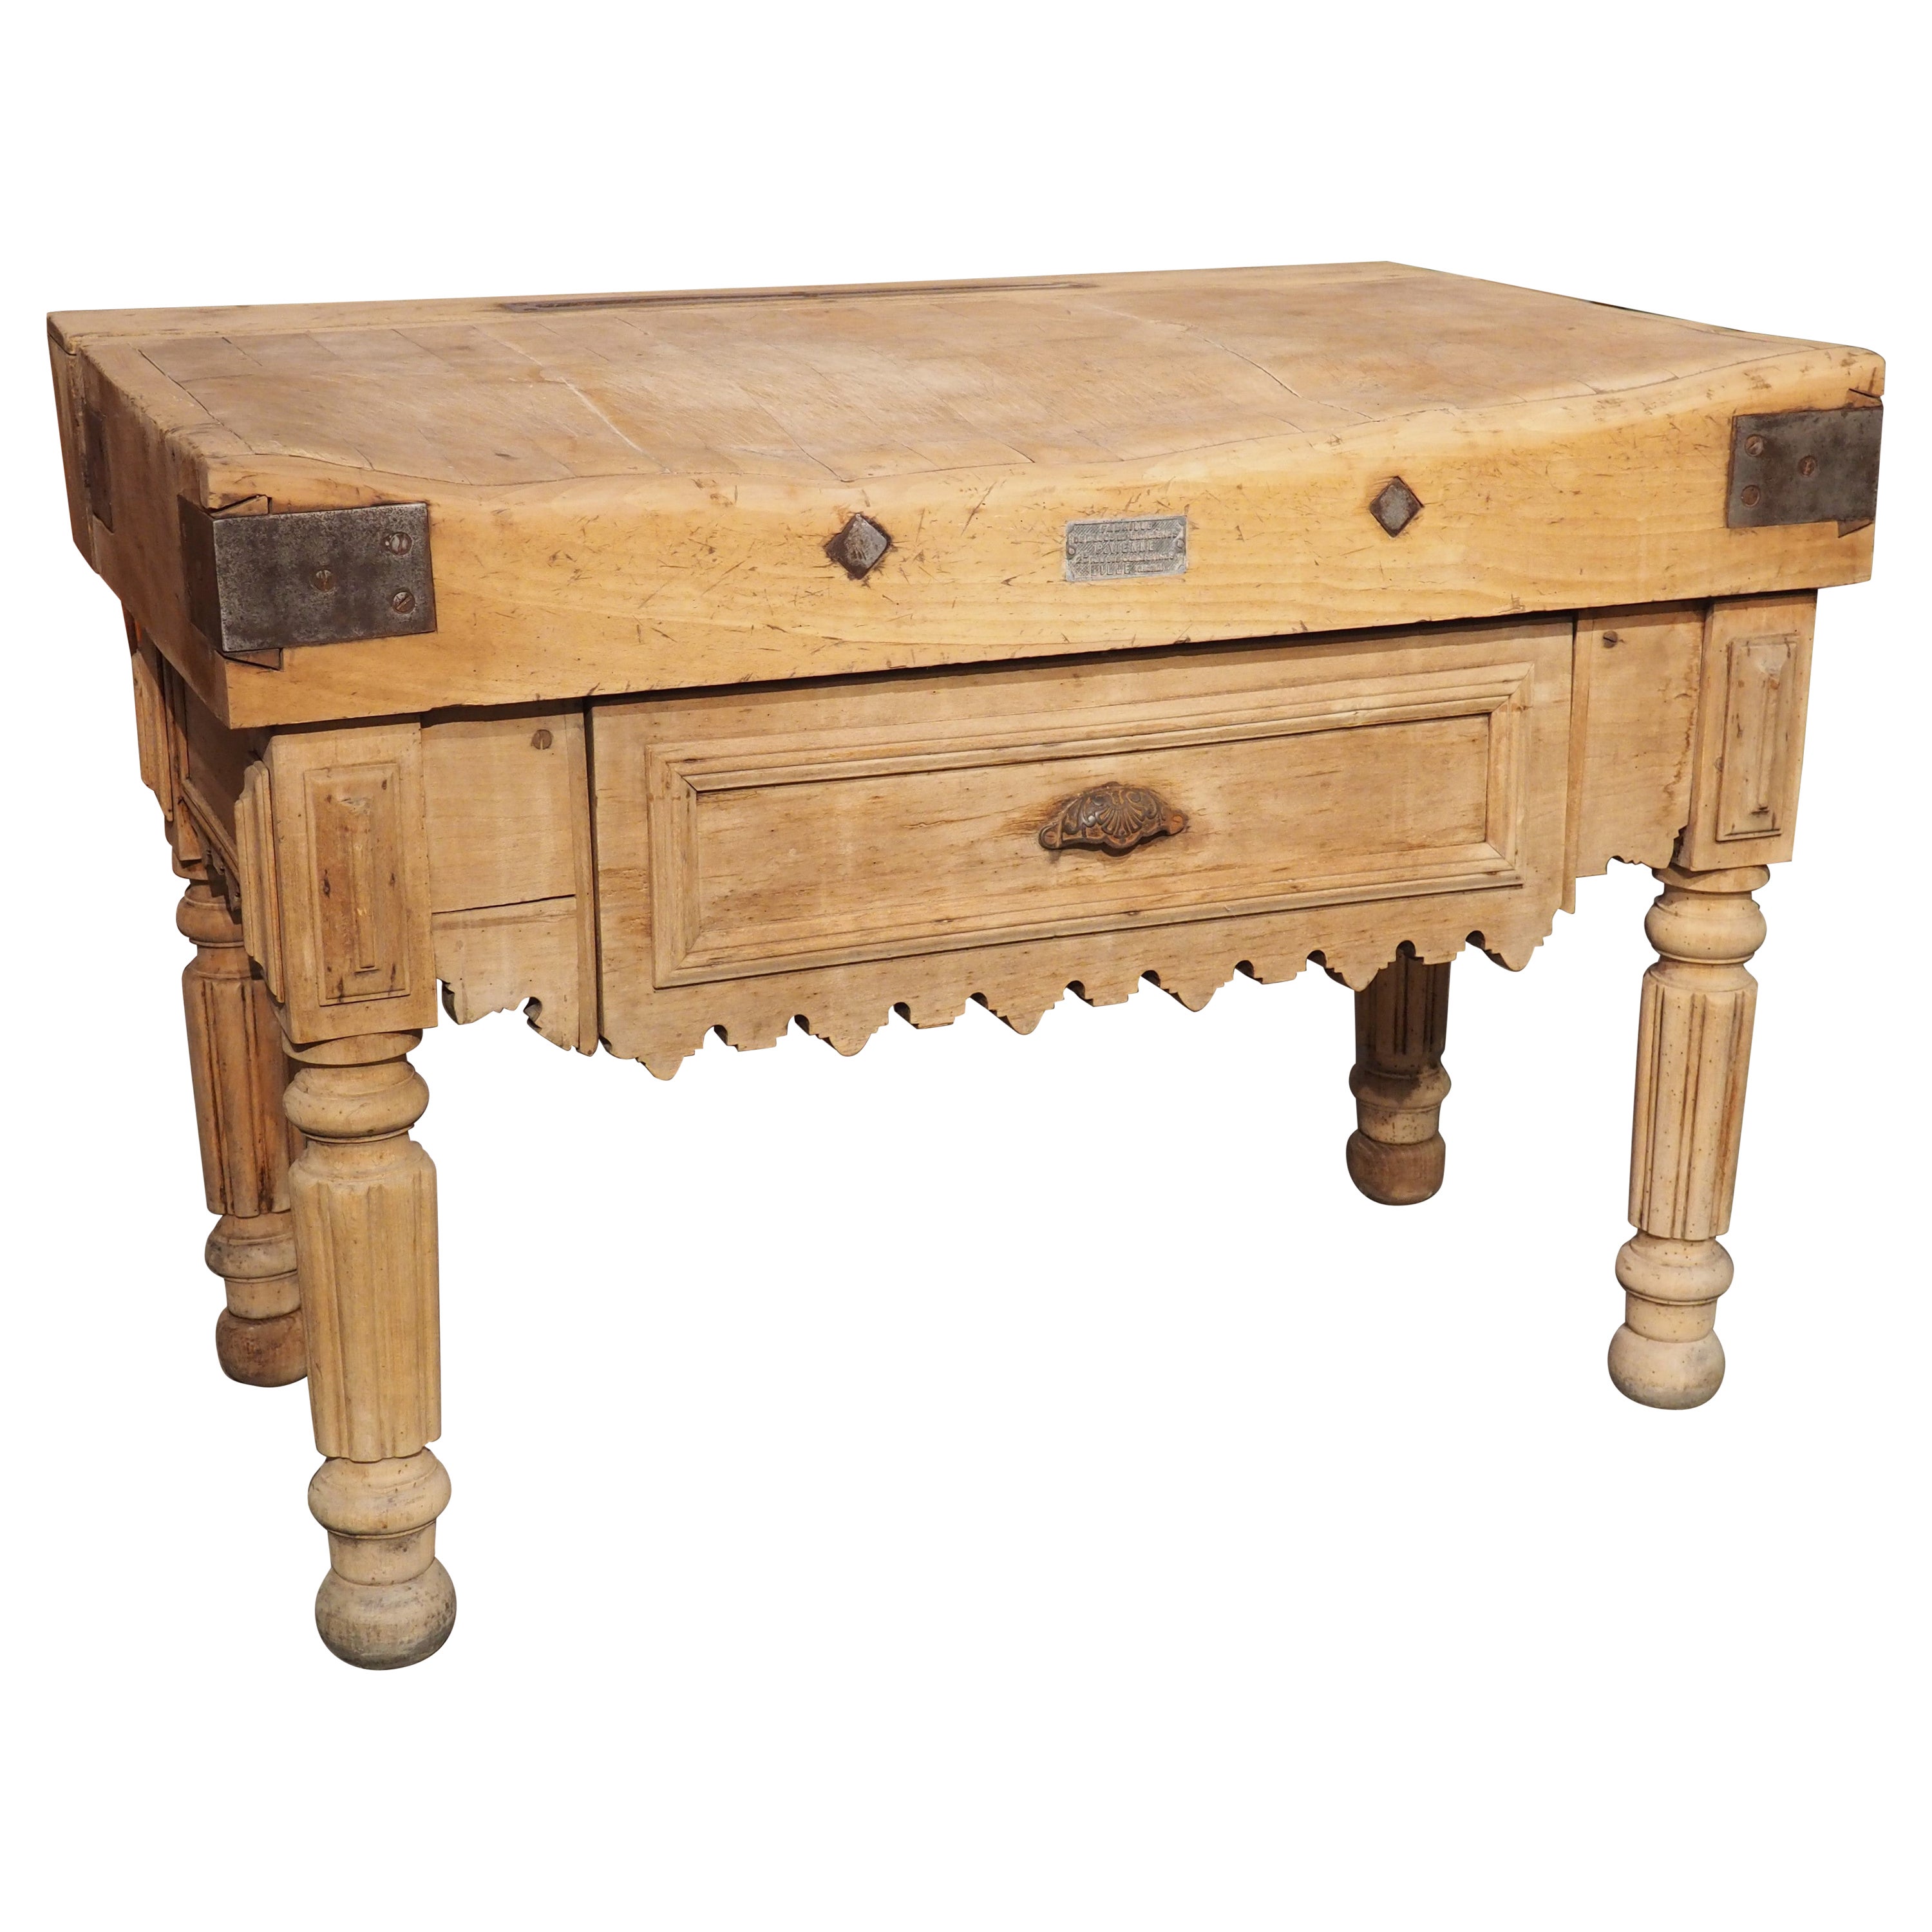 Circa 1880 Butcher Block Table from Lille, France